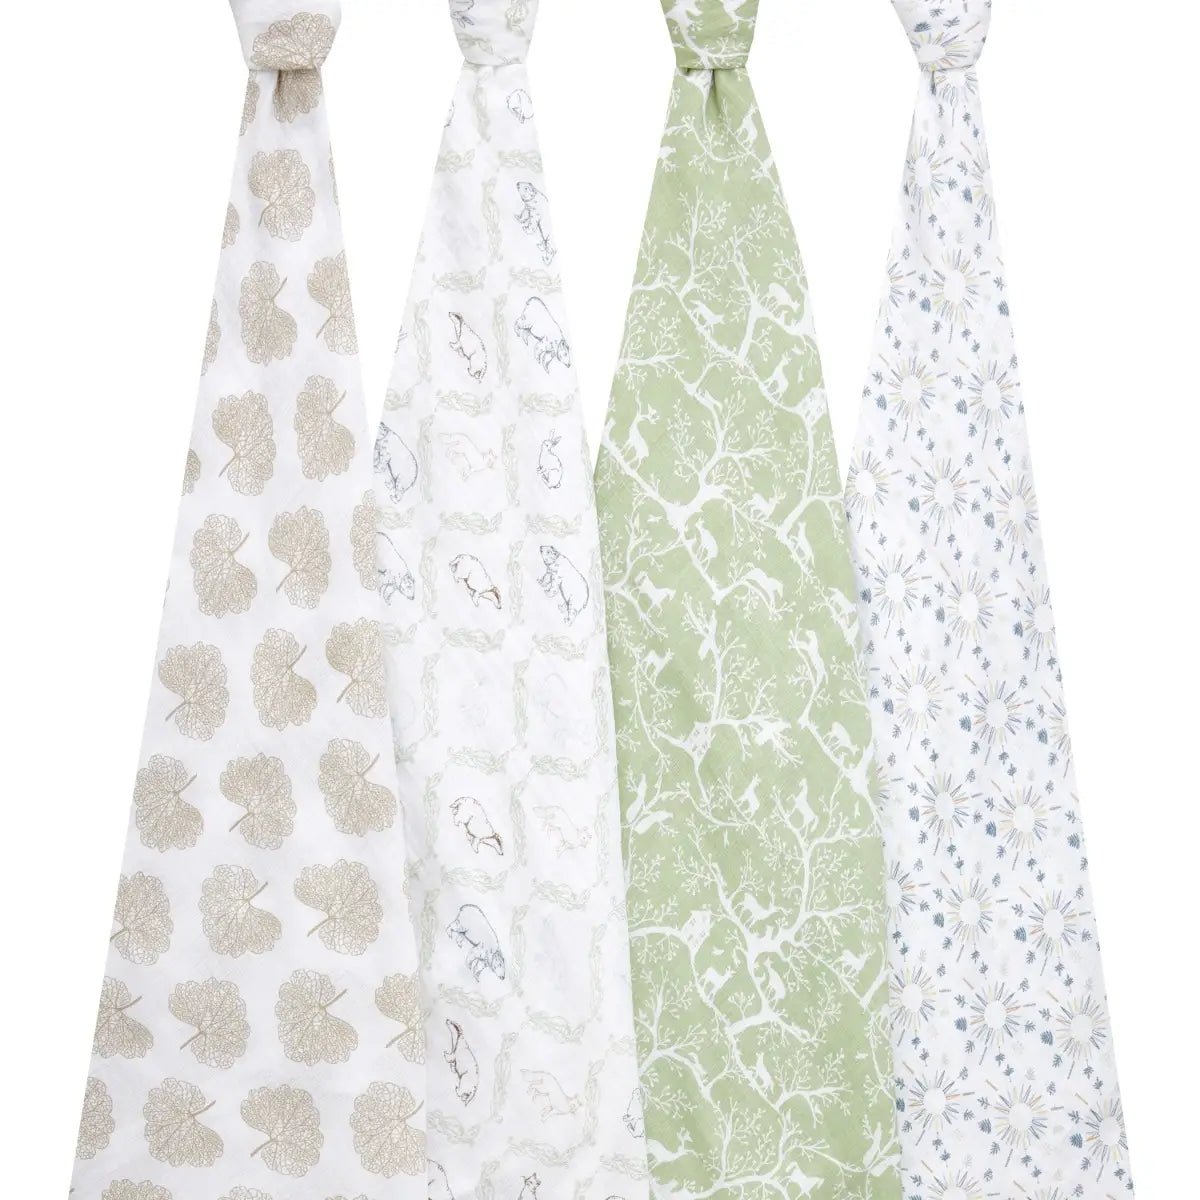 Bambinista-ADEN + ANAIS-Blankets-ADEN + ANAIS Essentials 4-pack Swaddles - Harmony